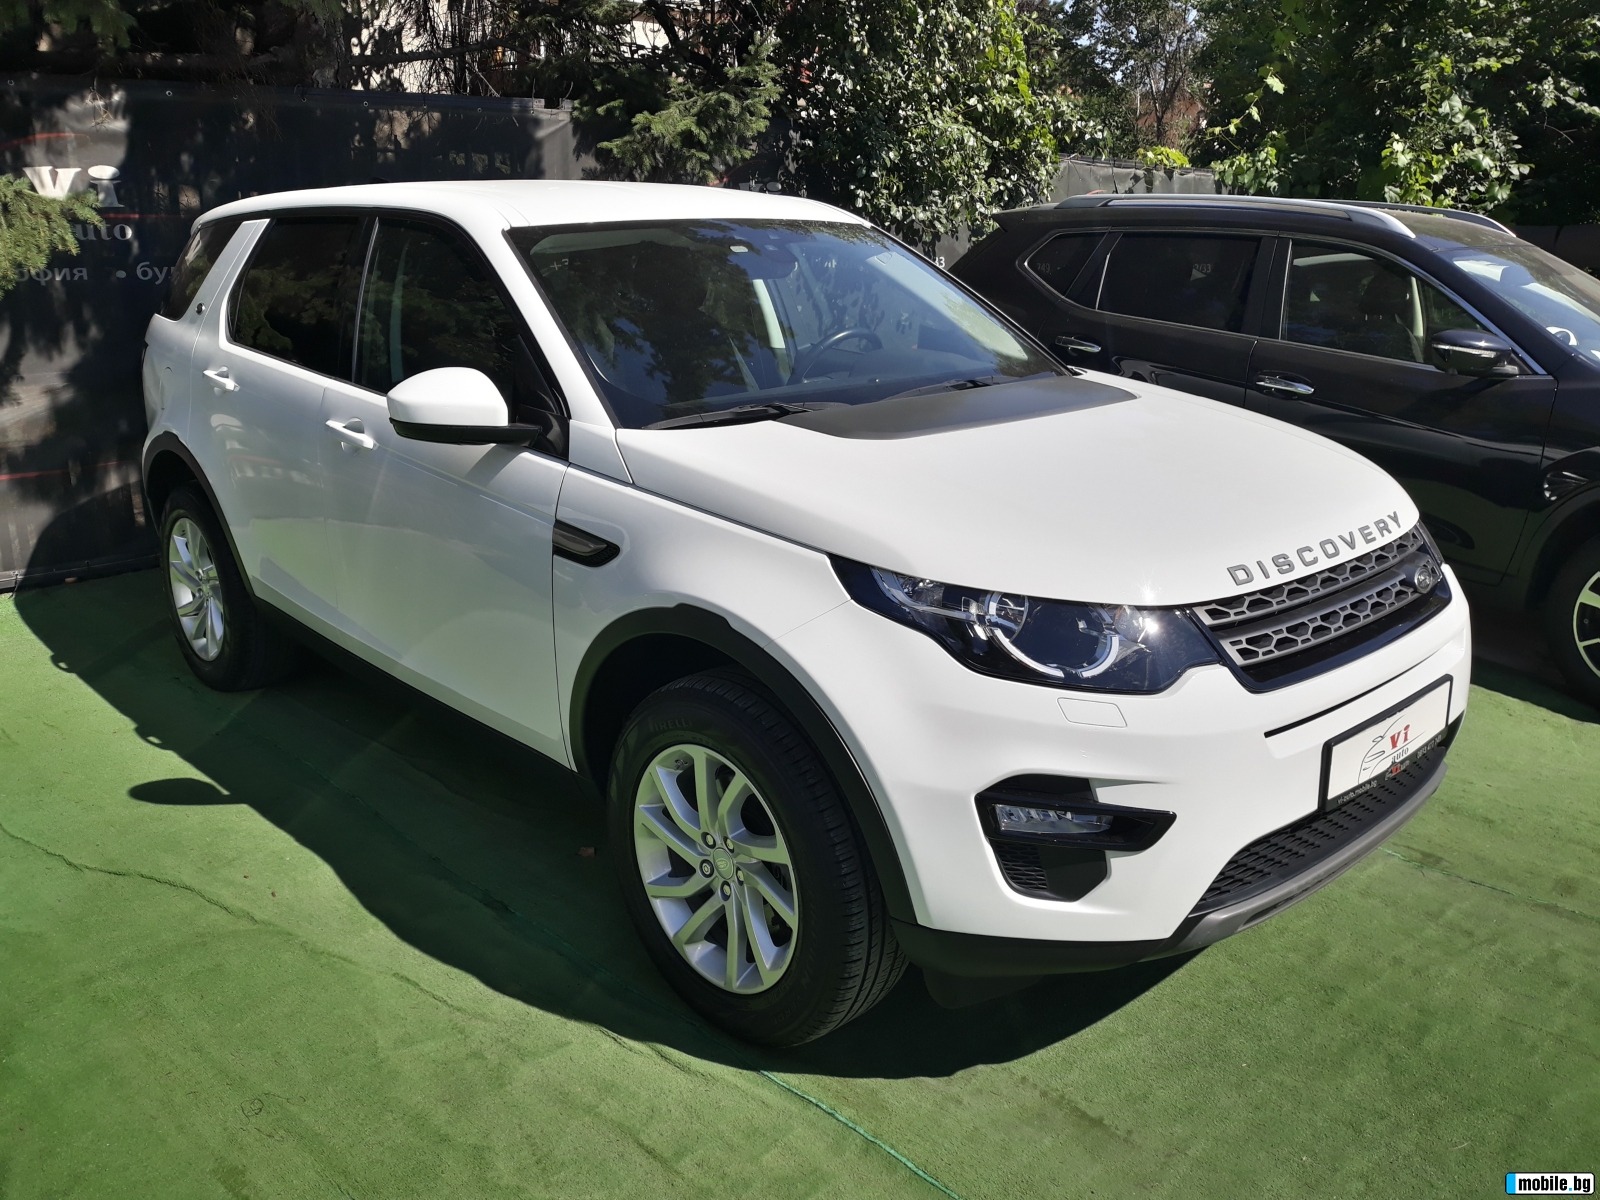 Land Rover Discovery SPORT/4x4 | Mobile.bg   3